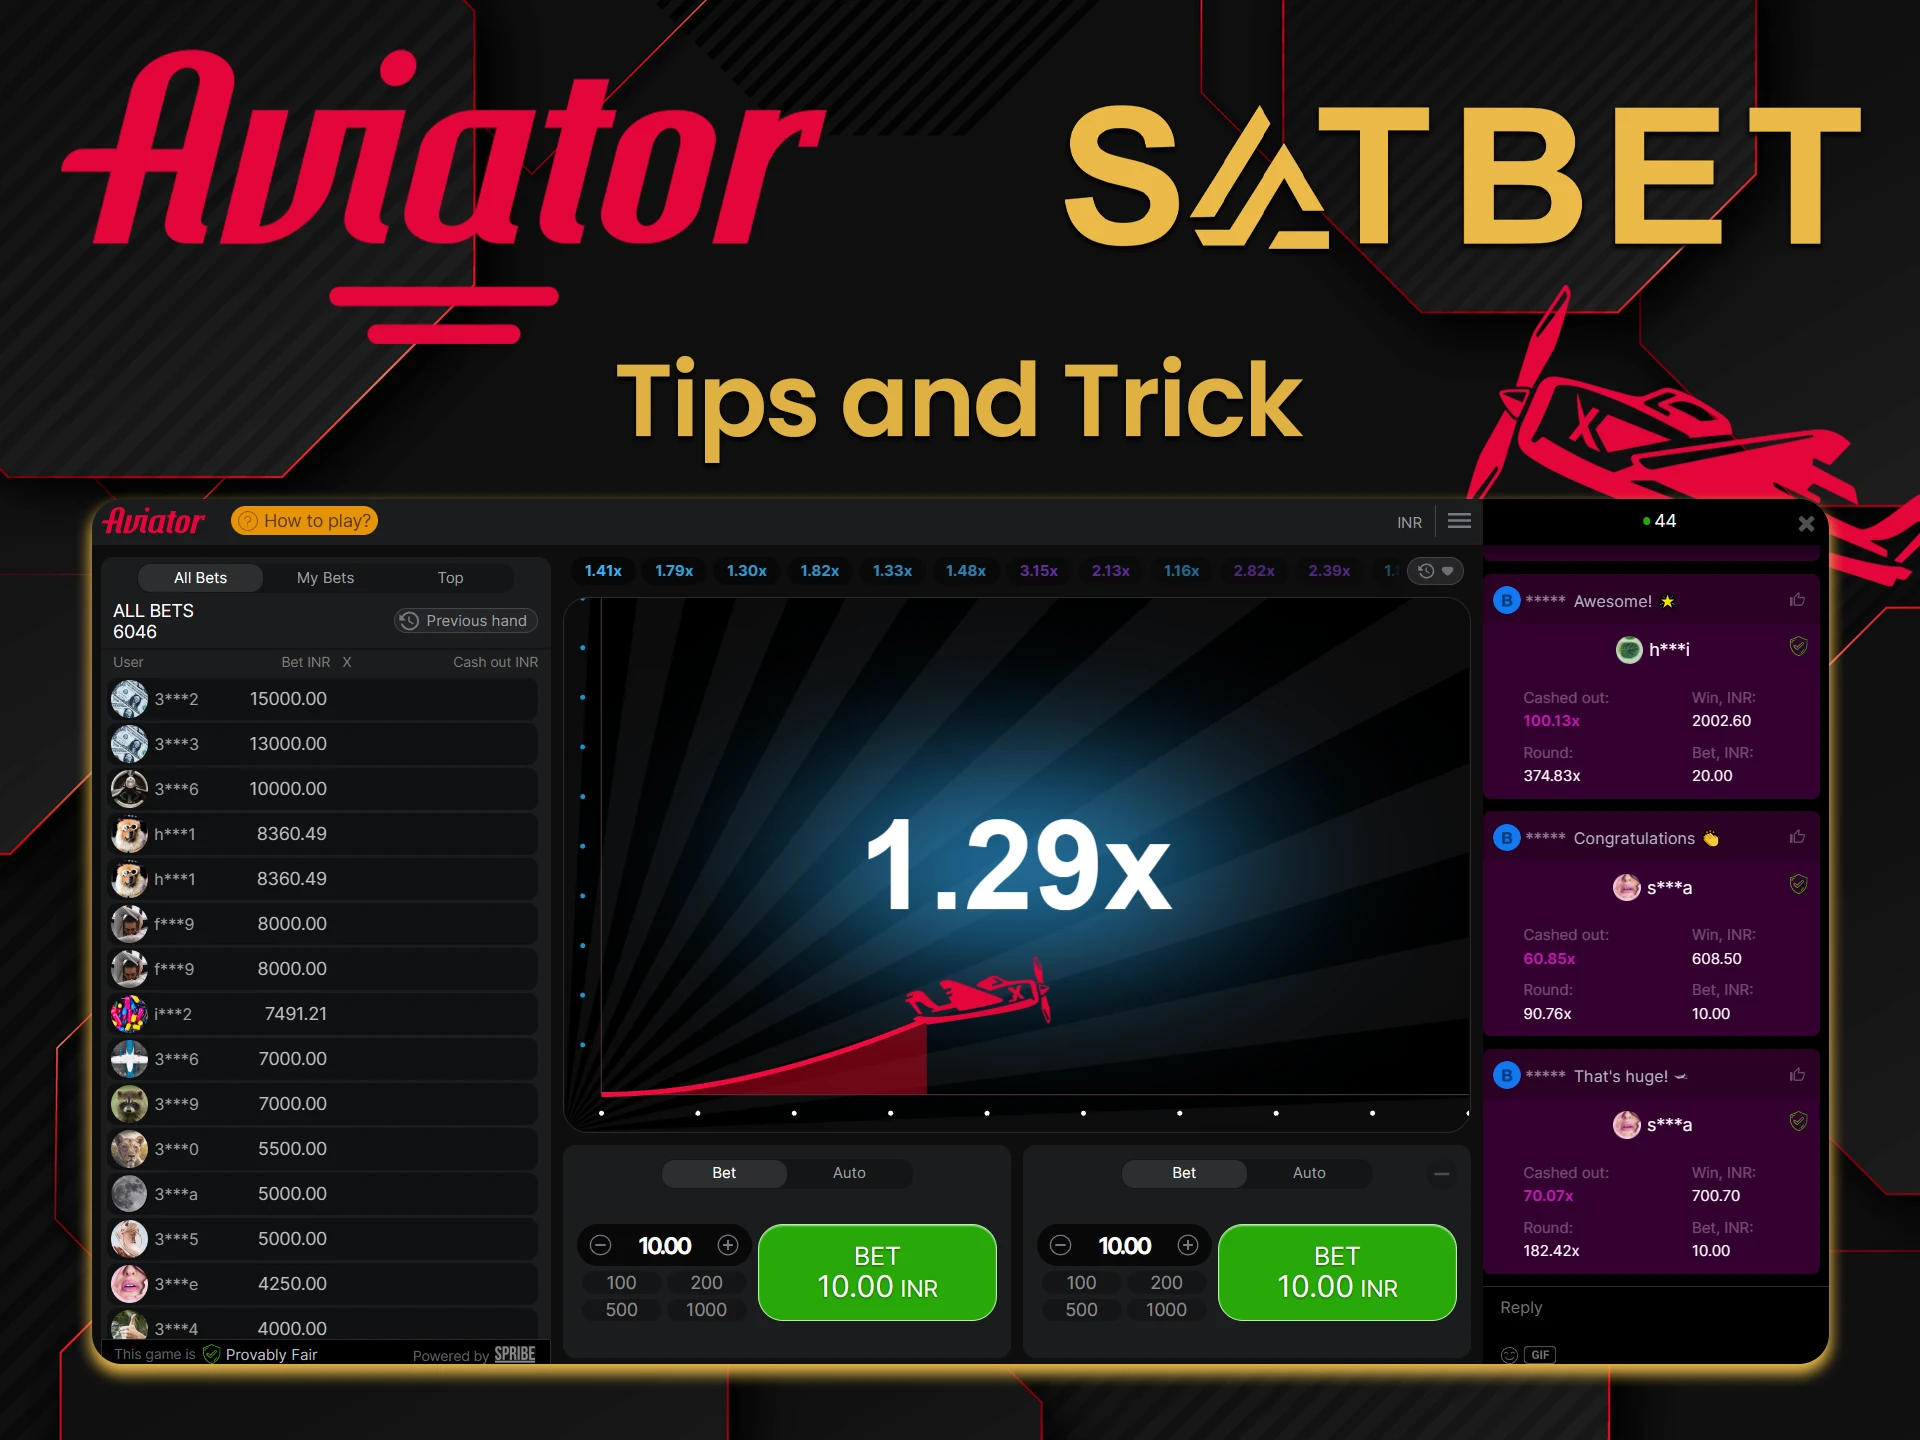 Take advantage of Satbet's tips and tricks for playing Aviator.